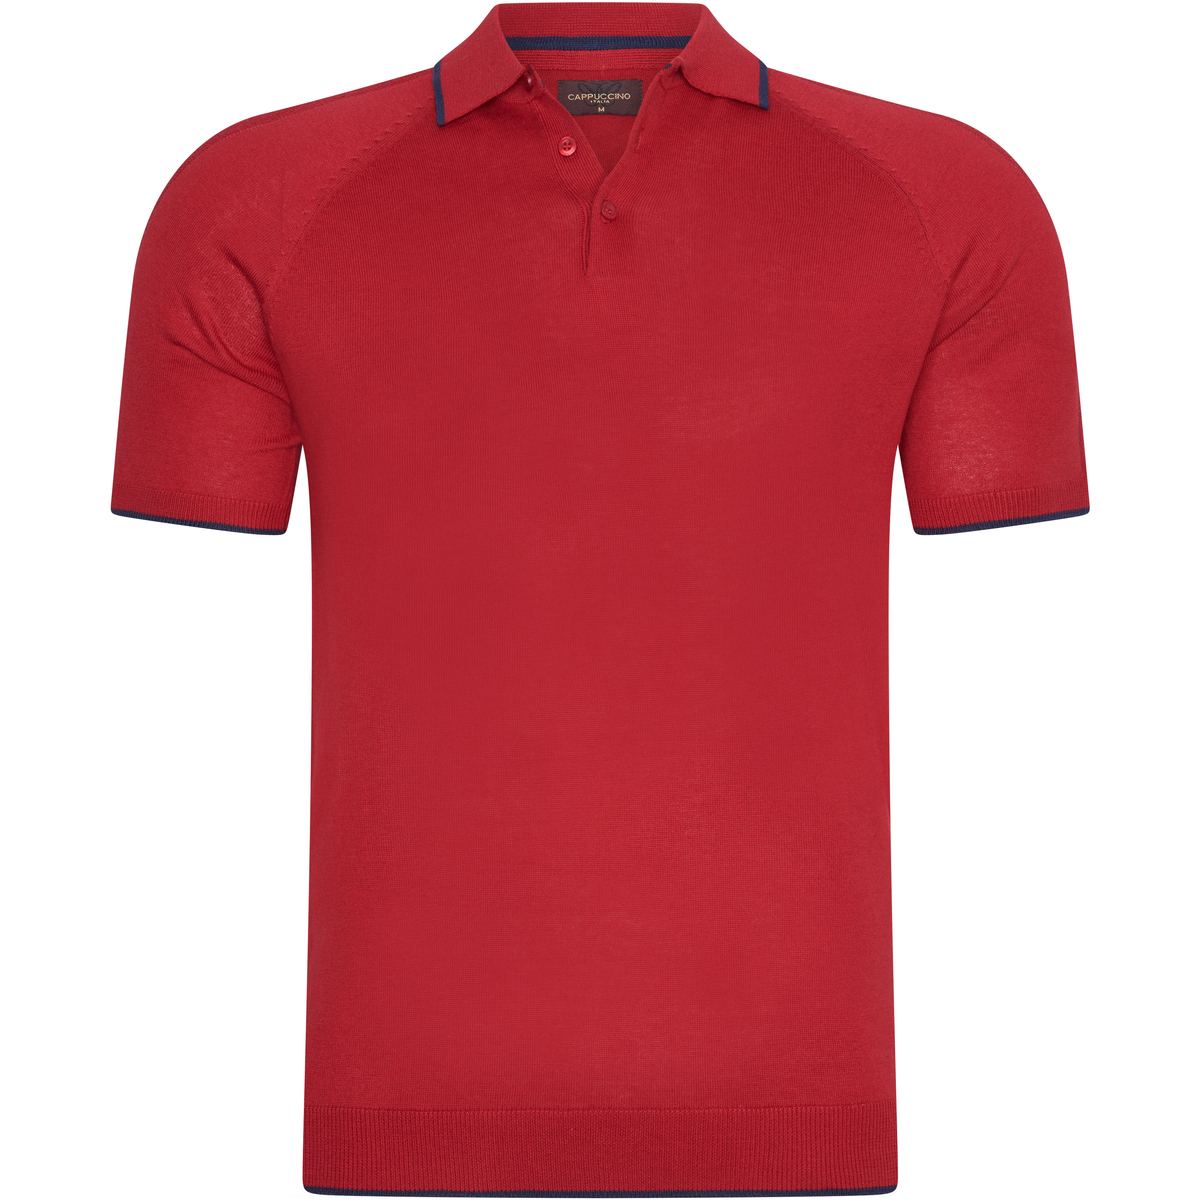 Textiel Heren Polo's korte mouwen Cappuccino Italia Tipped Tricot Polo Rood